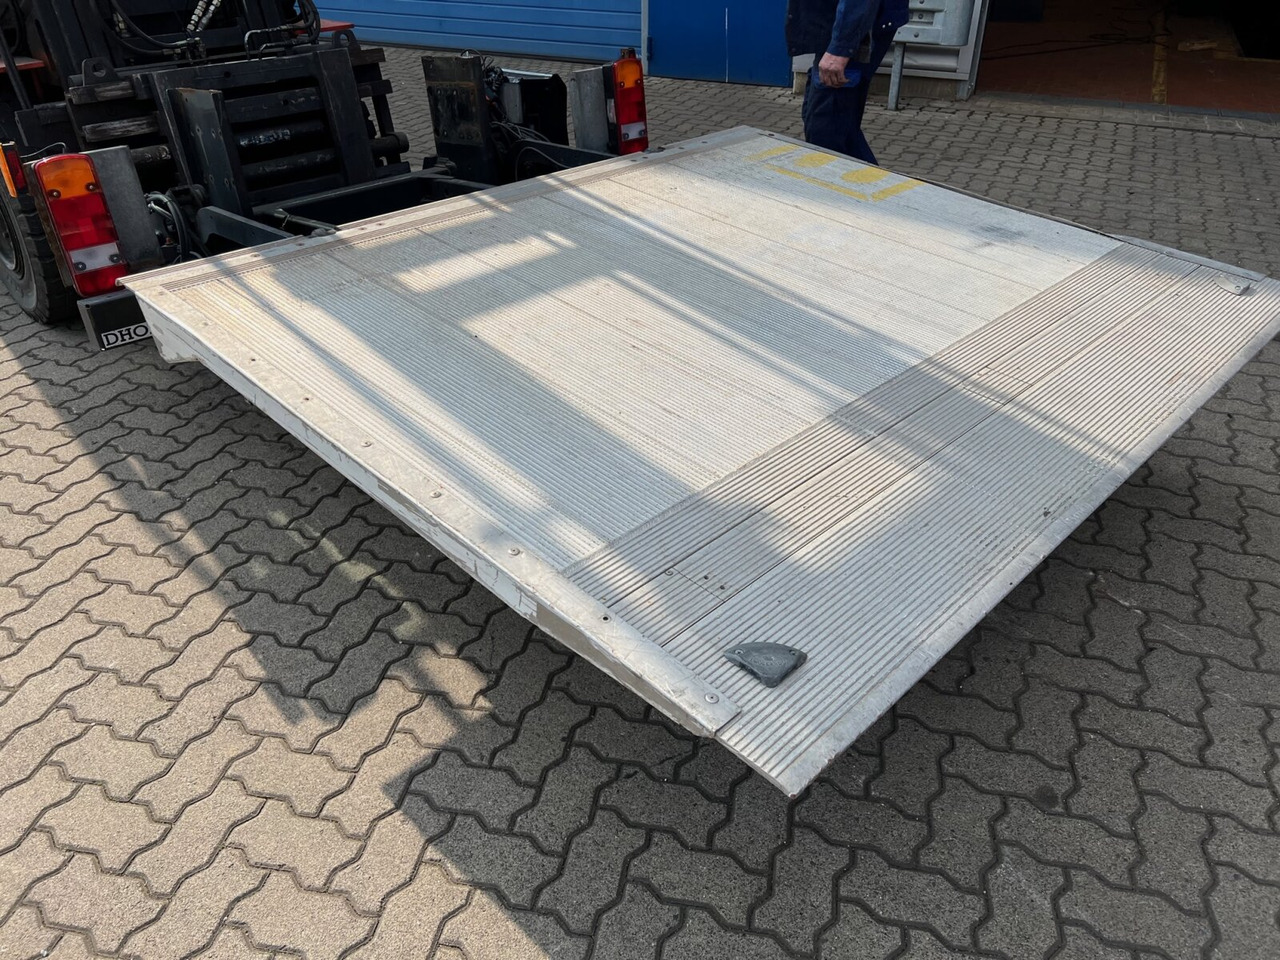 Tail lift Dhollandia Ladebordwand DH LM15 Dhollandia Ladebordwand DH LM15: picture 2